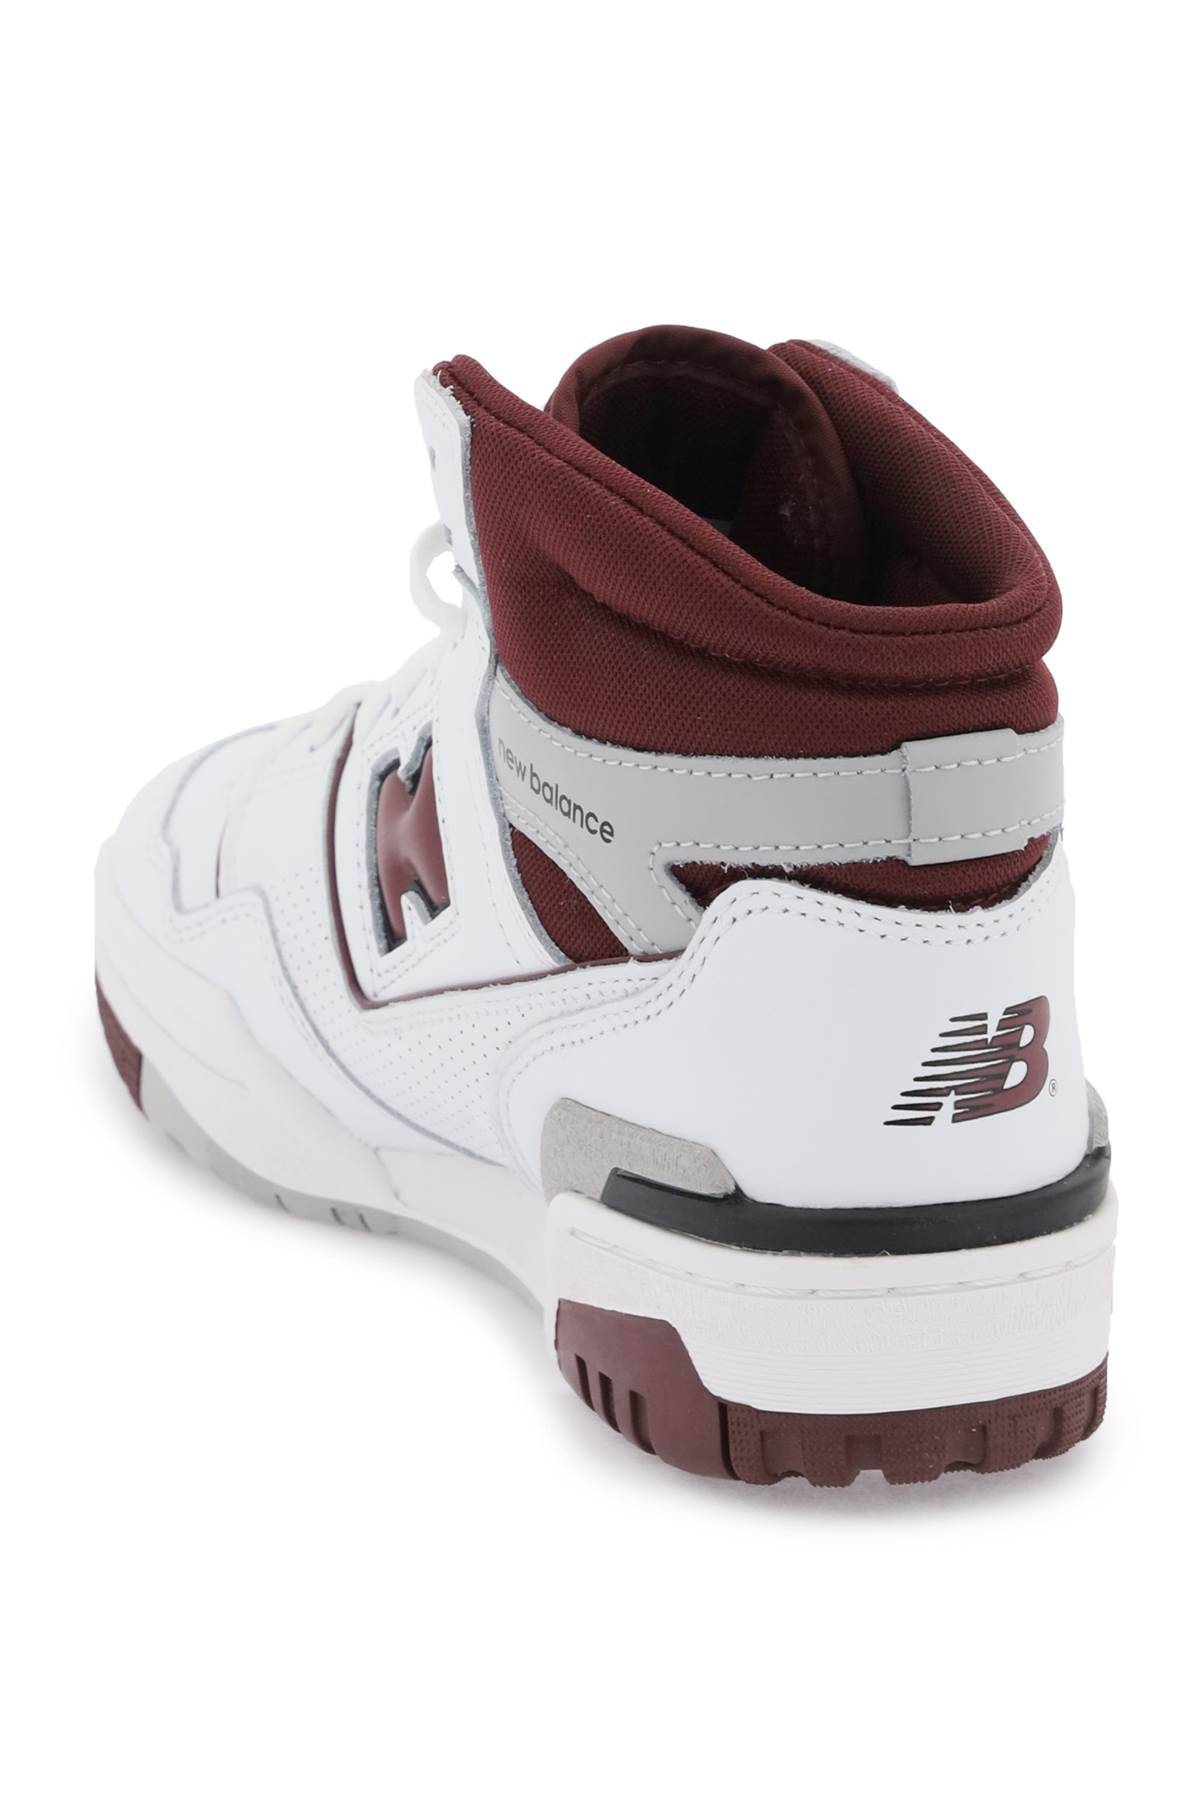 Shop New Balance 650 Sneakers In White,red